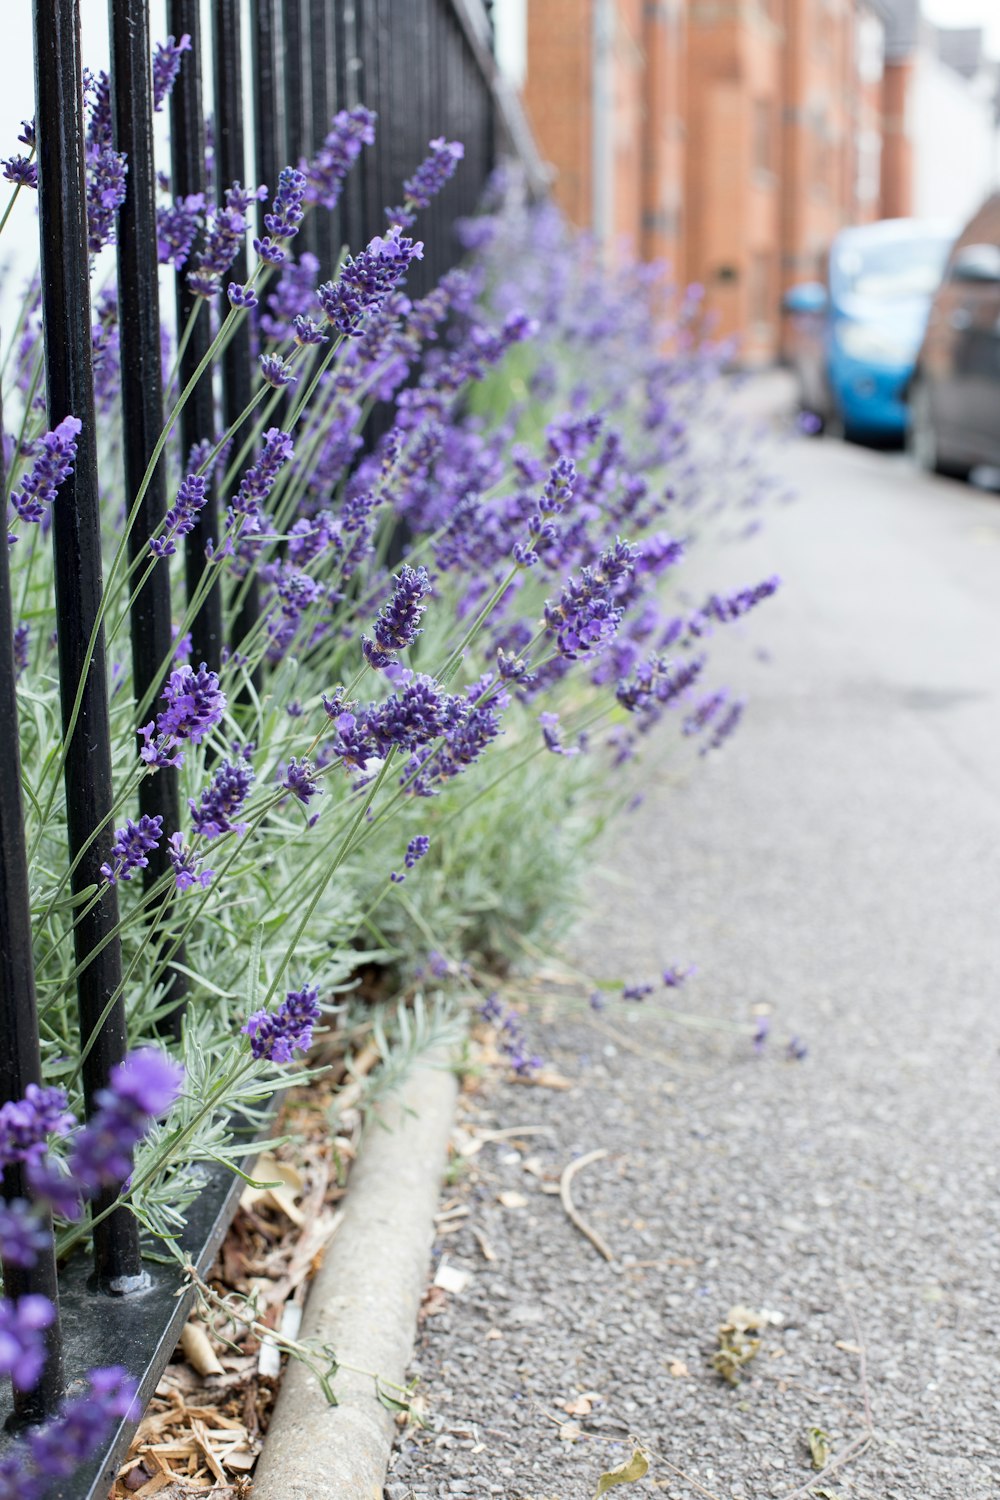 purple flowers beside gray concrete road during daytime